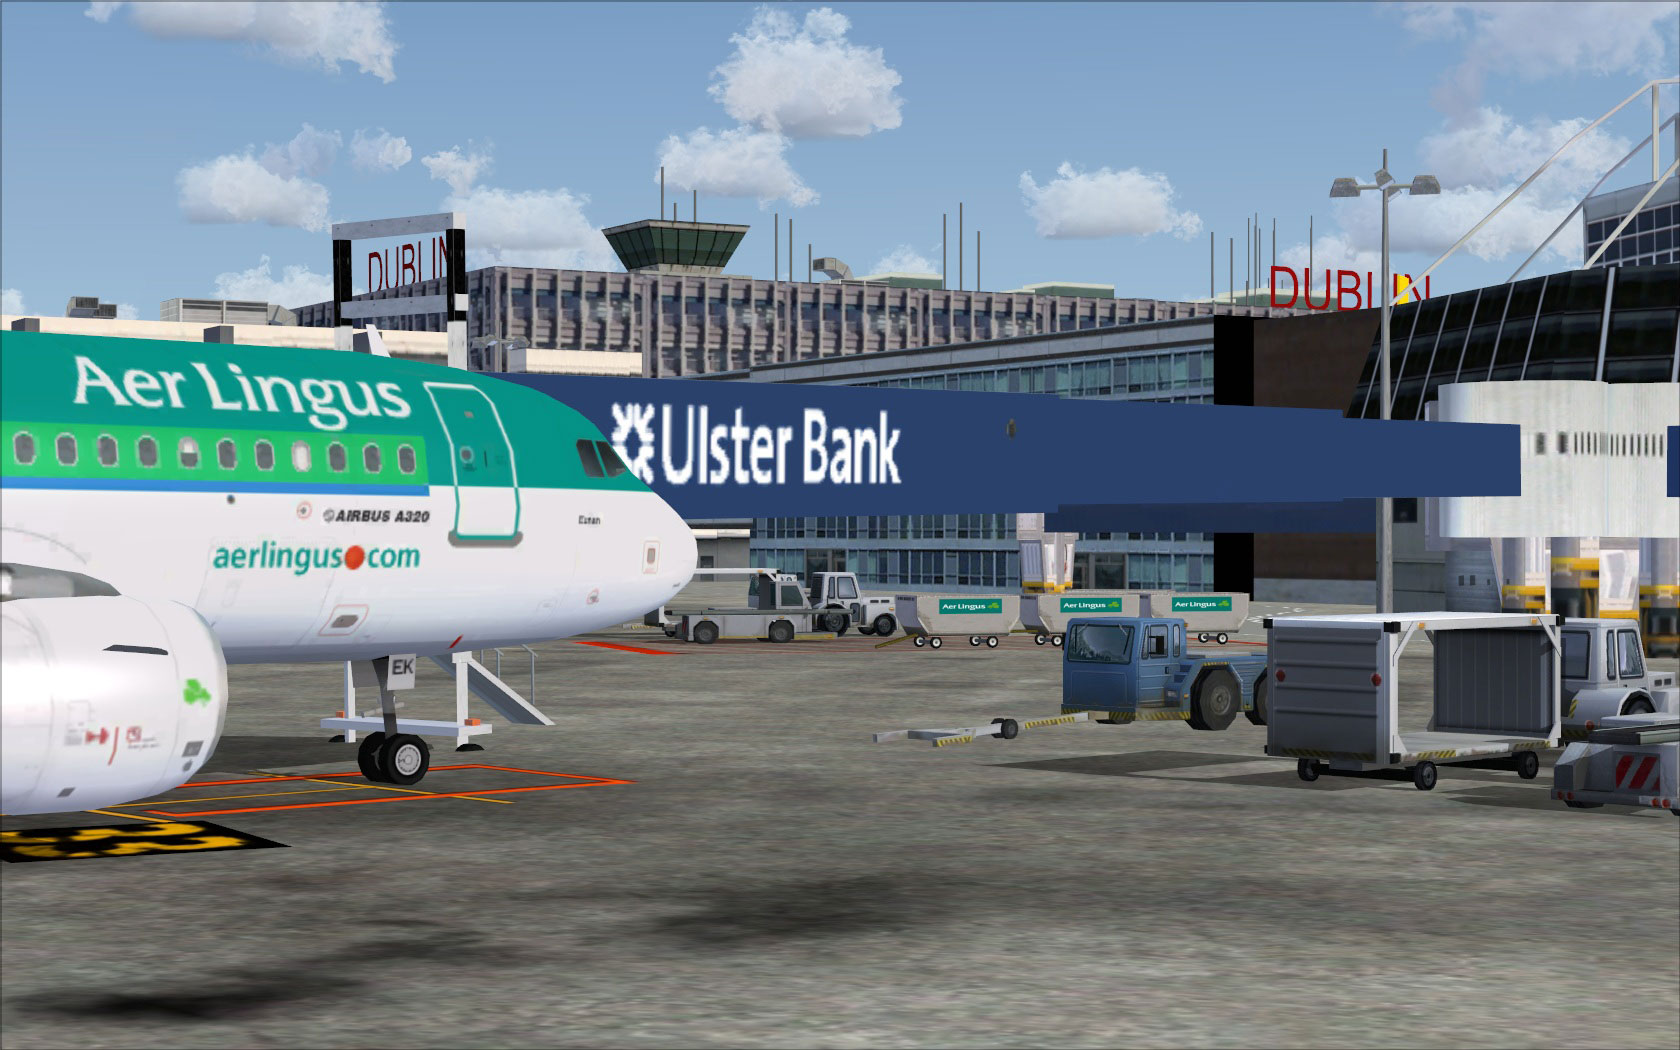 fsx airport scenery free download